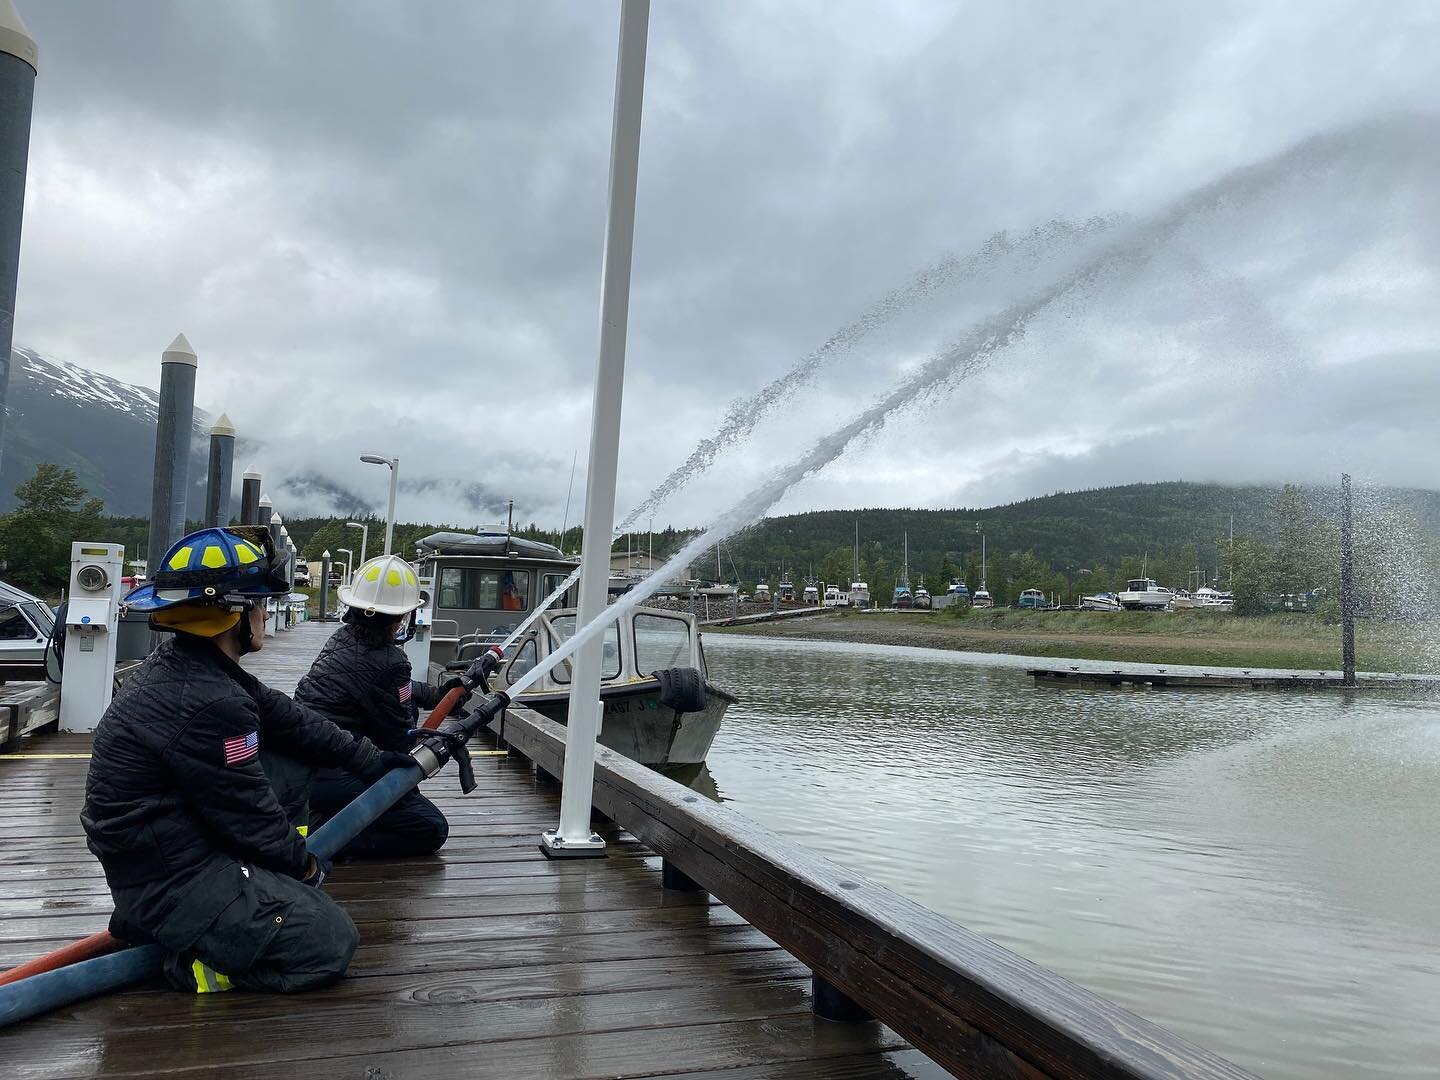 Testing out new equipment and honing skills for operations at the small boat harbor utilizing the standpipe system. The new in line pressure gauge allows for firefighters to get a more accurate pressure reading at each of the standpipe connections so